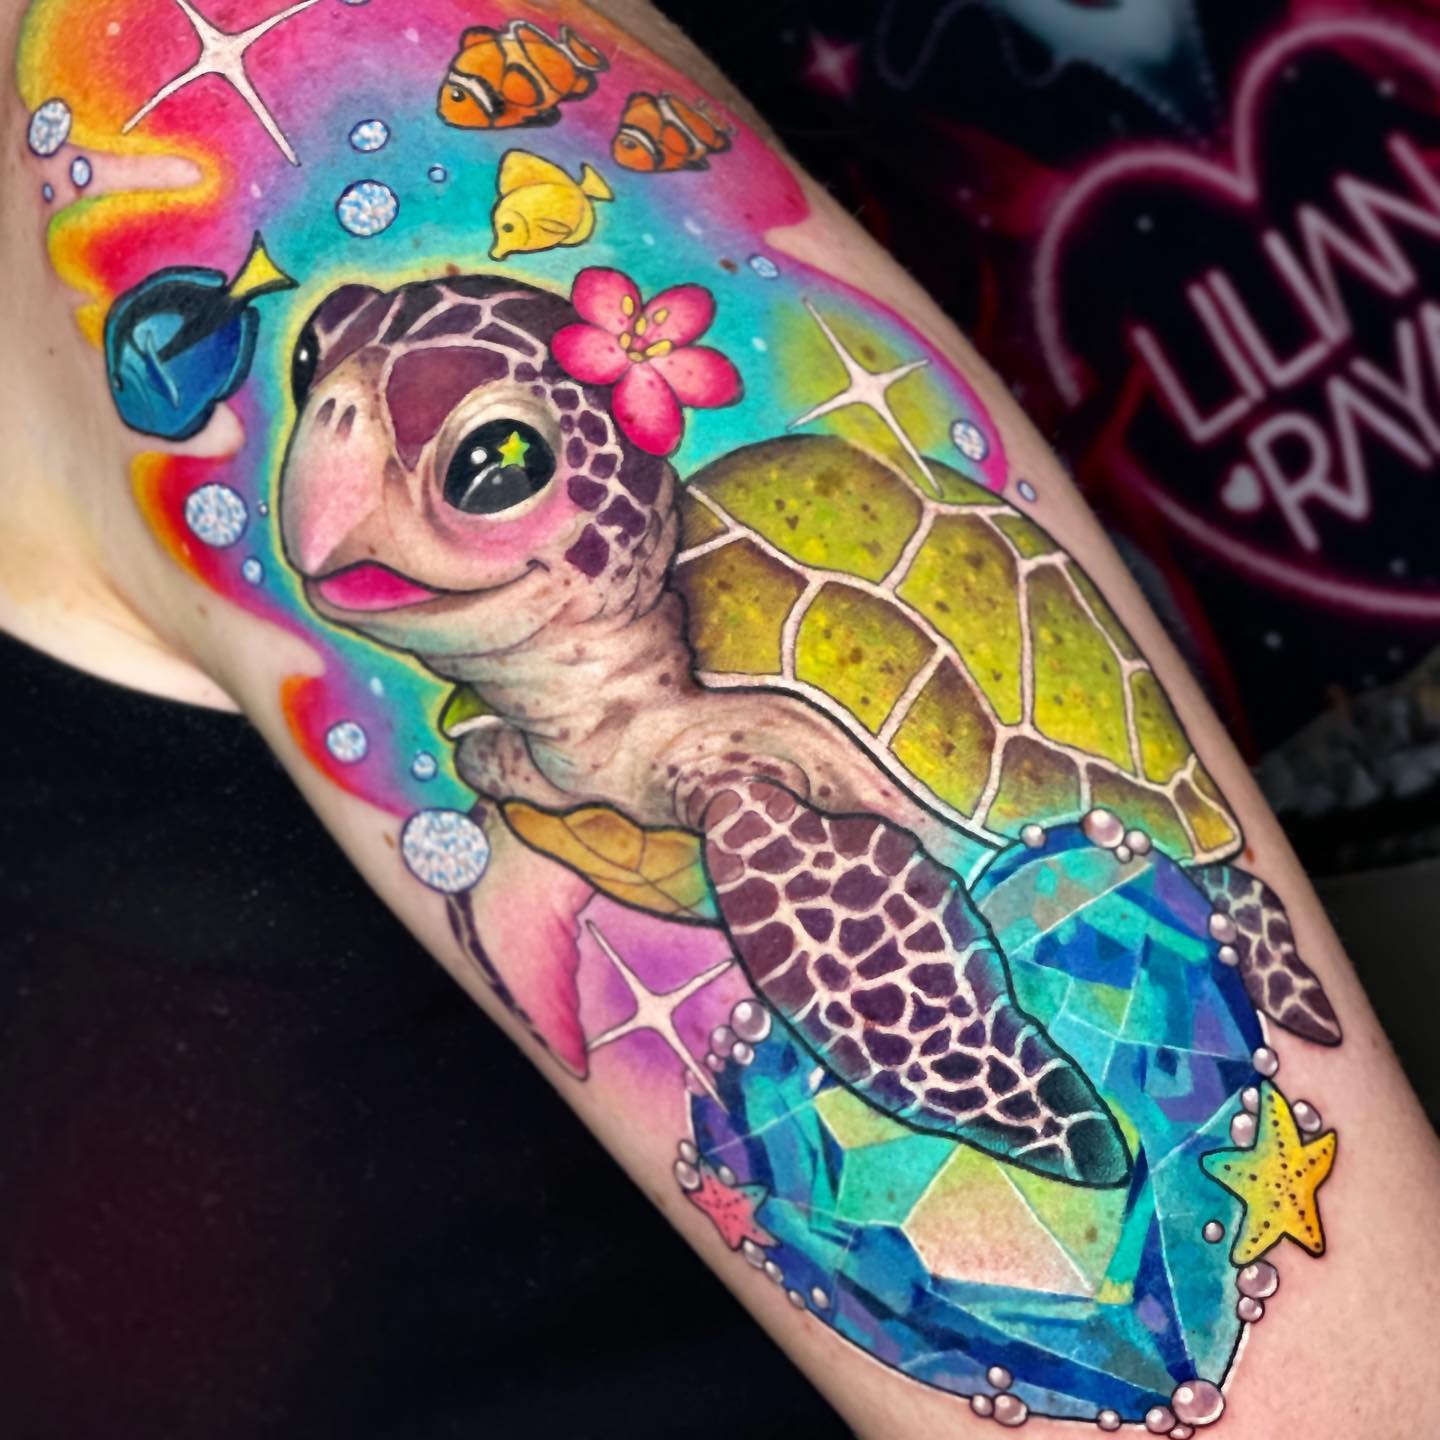 Crystals, flowers and pink color are ready to ornament your beautiful sea turtle tattoo. Little pink flower that is placed on its head is a cute detail, too. Why don't you get a tattoo like this?